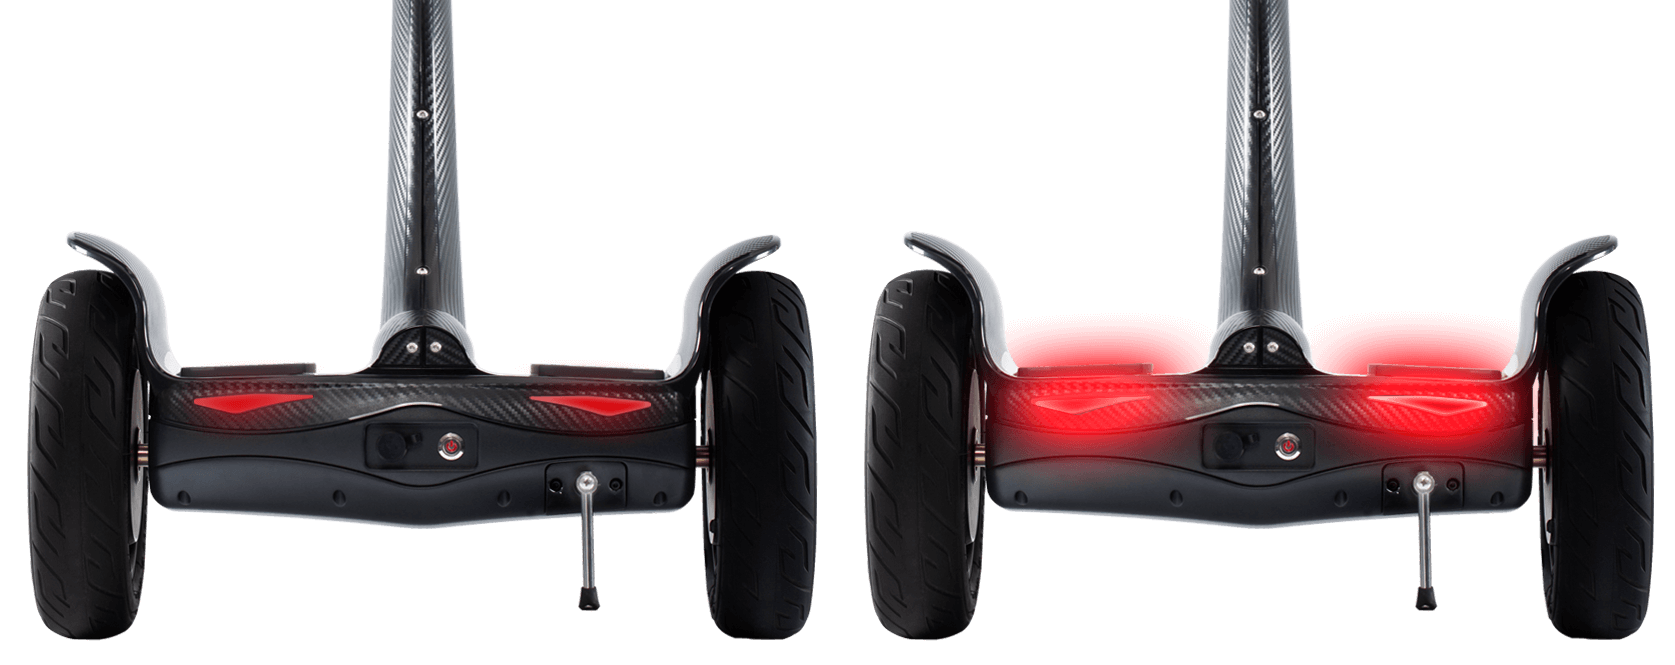 Airwheel S8 two wheel saddle-equipped scooter